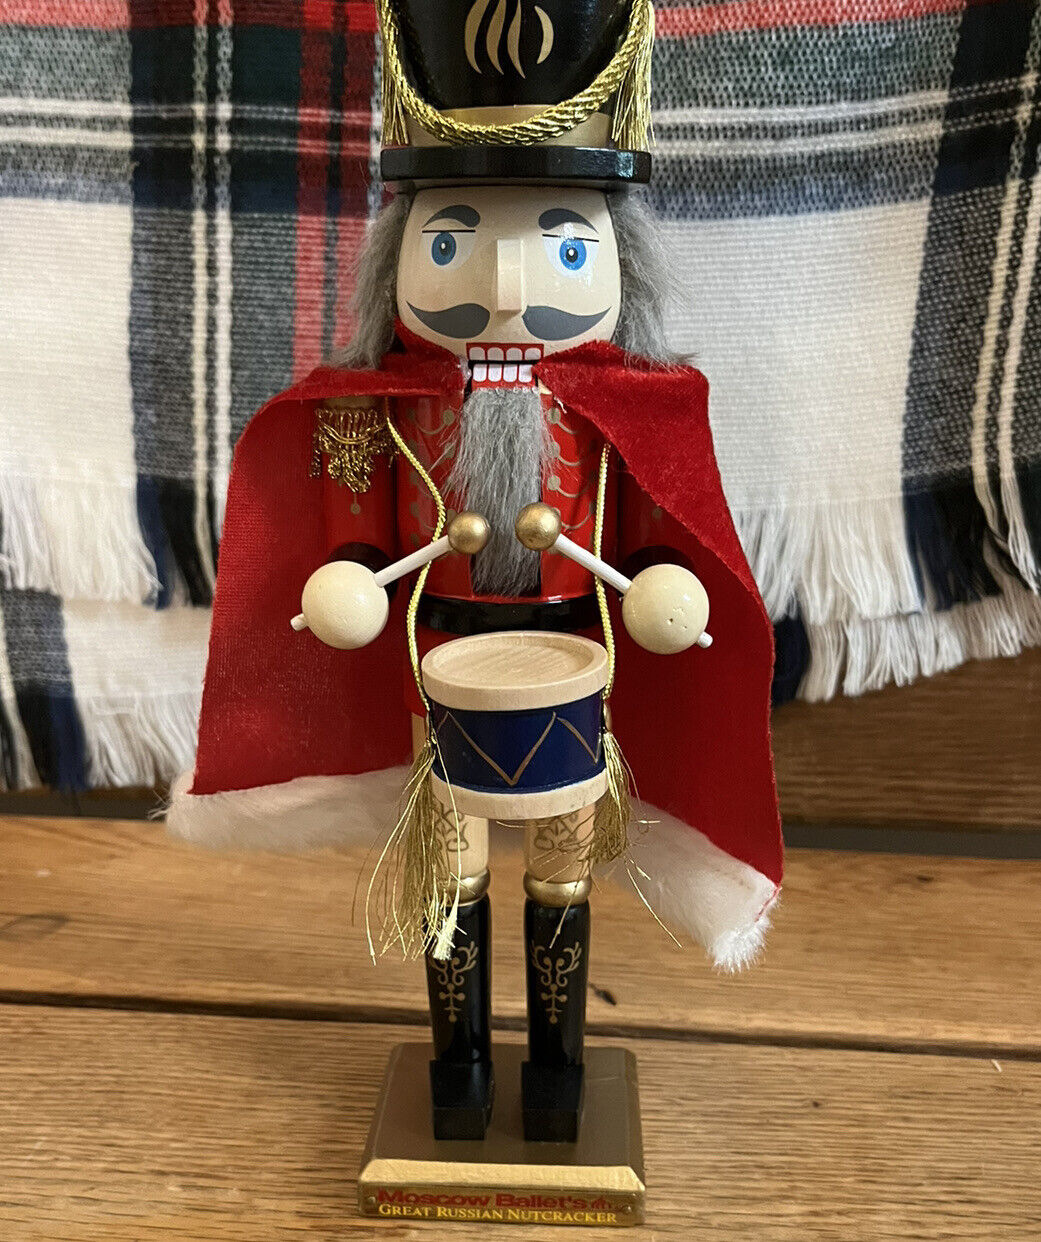 MOSCOW BALLET’S GREAT RUSSIAN 12” WOODEN NUTCRACKER without a box.